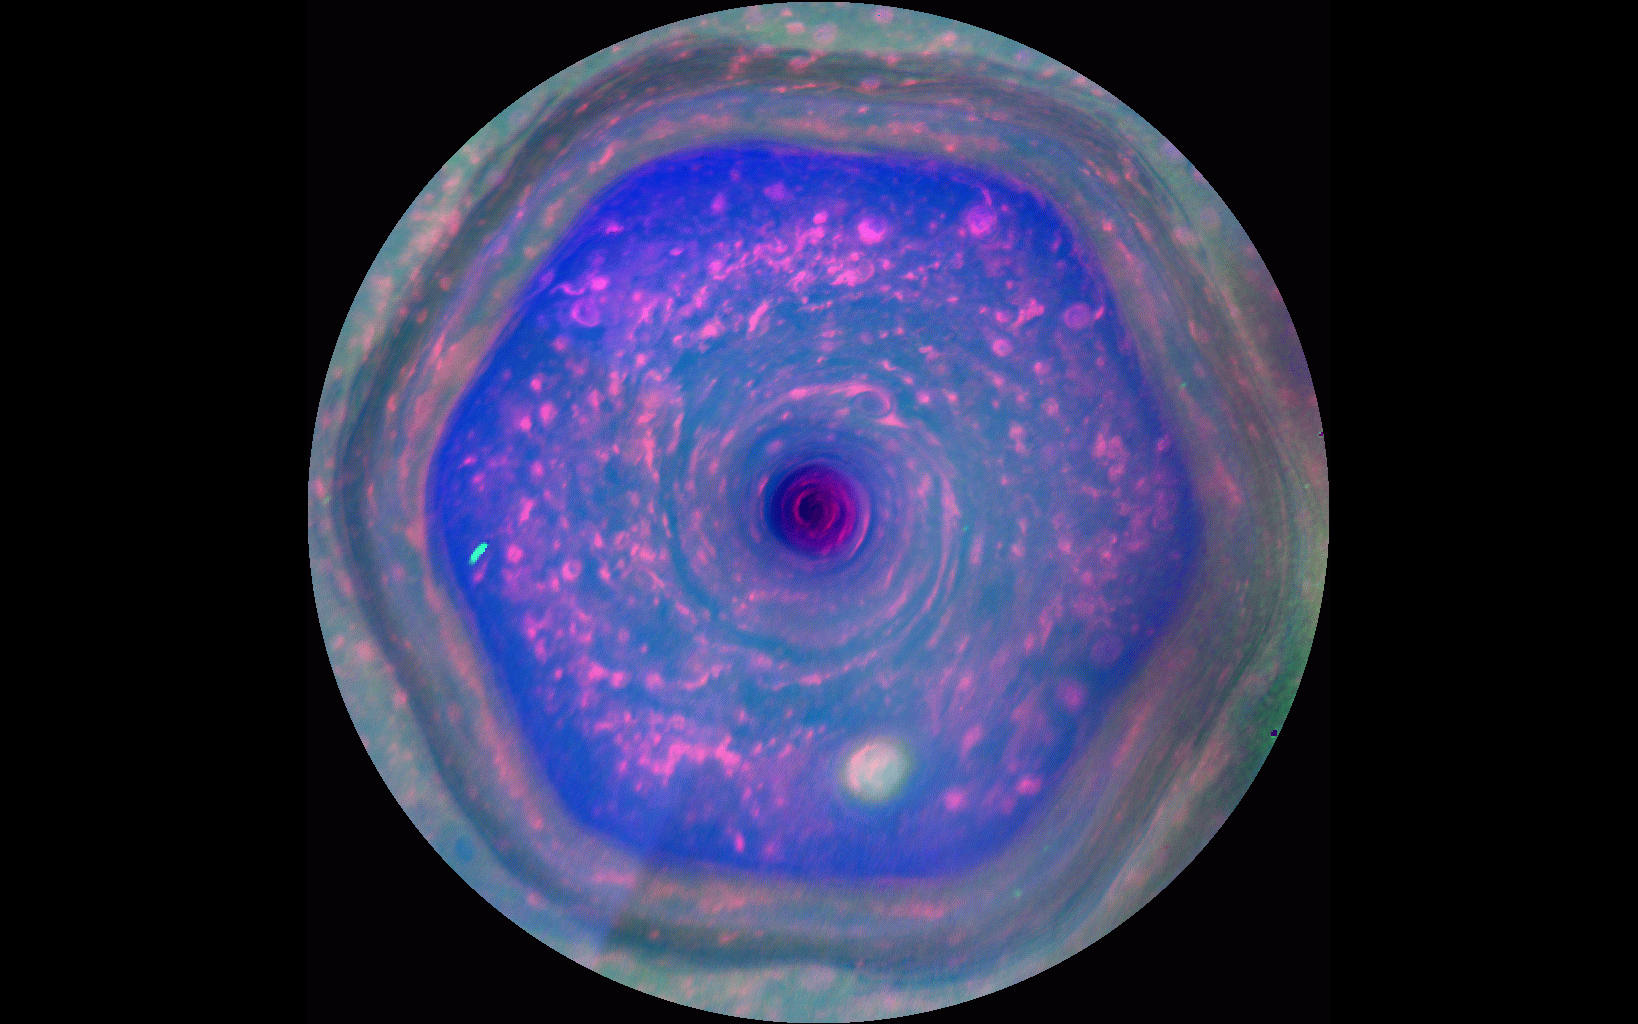 Saturn’s northern hemisphere is home to a strange hexagonal-shaped storm that has been raging for decades.